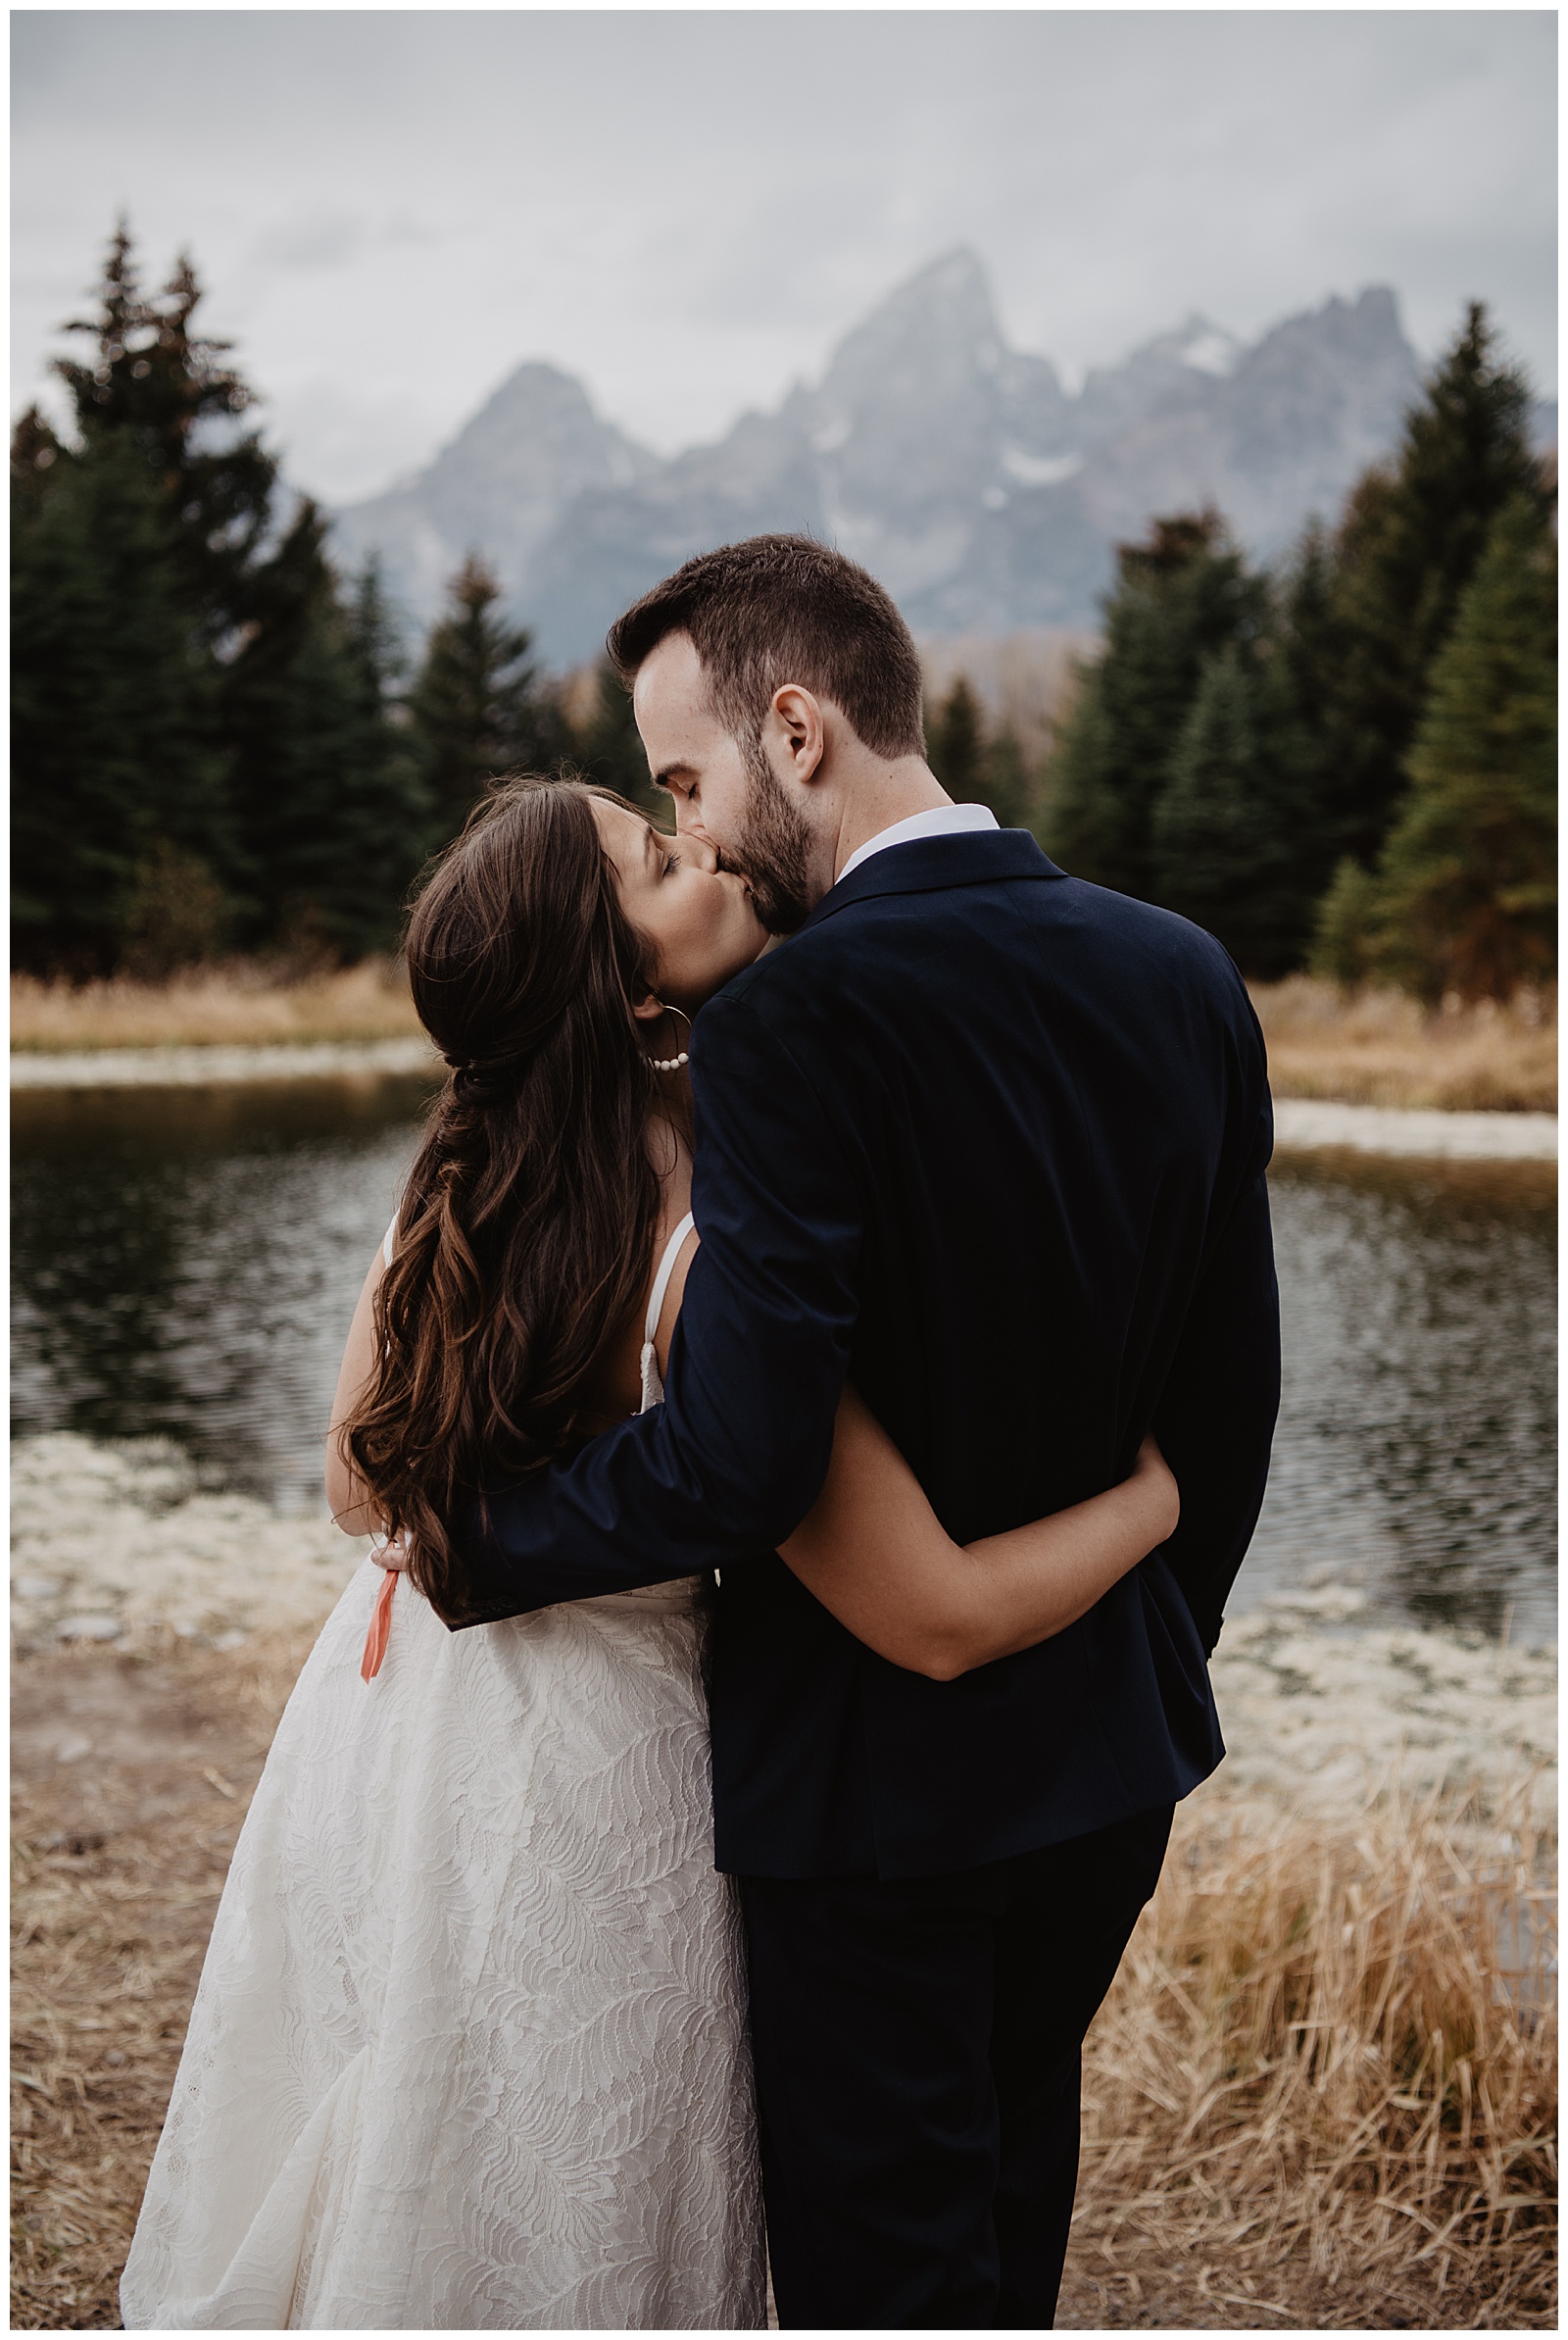 Grand Teton National Park fall weddingwith bride and groom holding each other by the waist and kissing in front of the Tetons with a creek near them